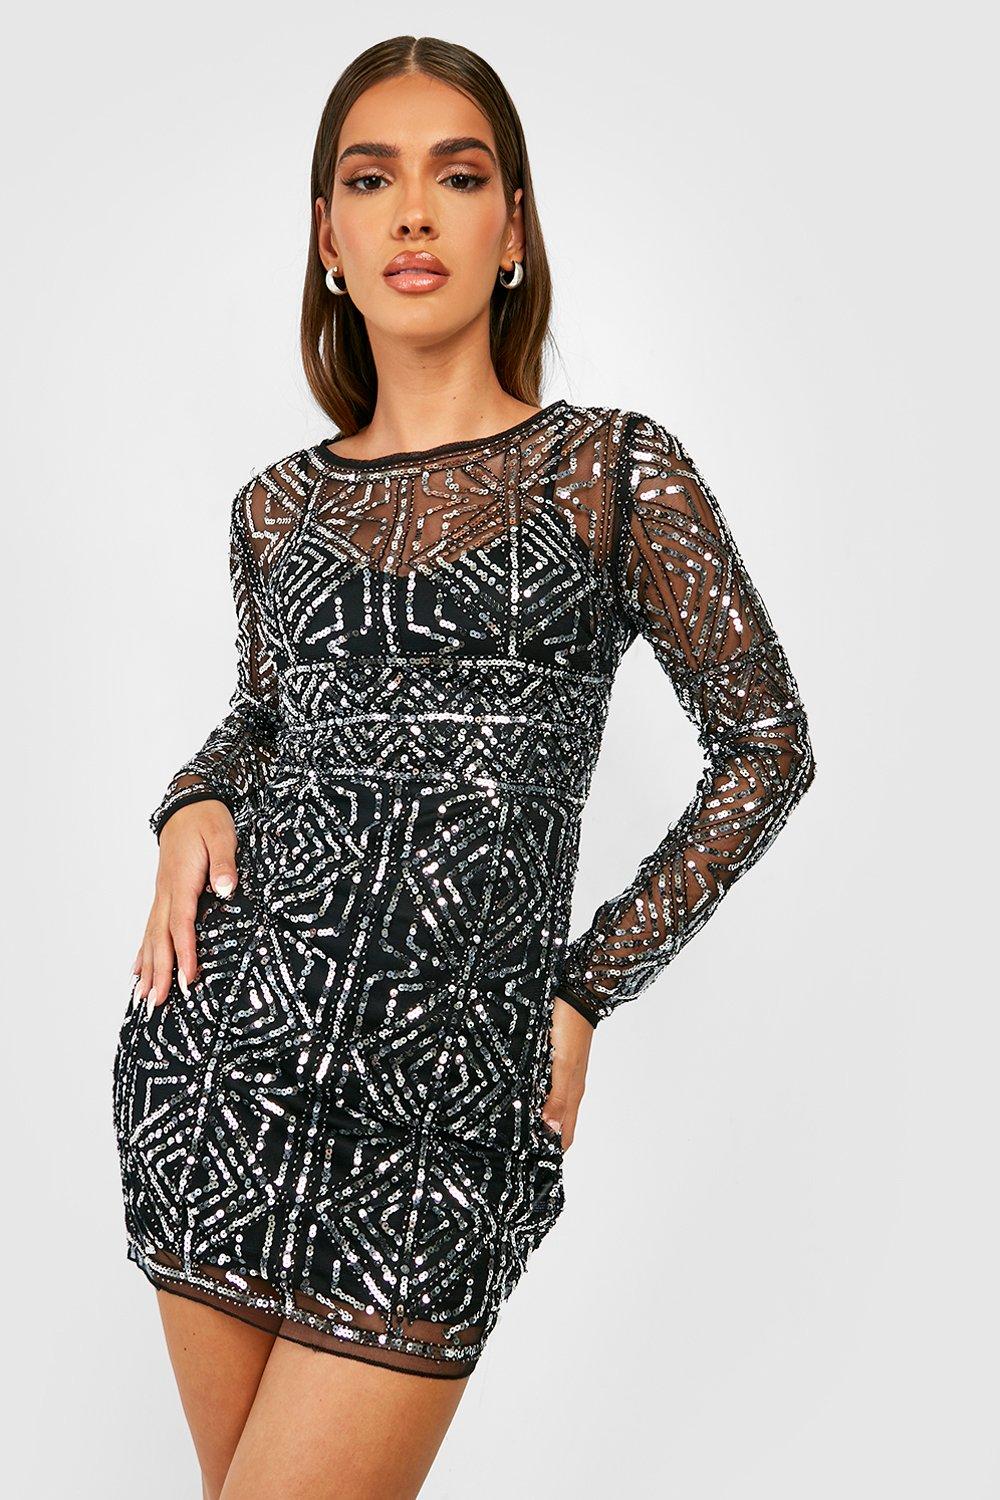 Boutique Embellished Bodycon Party Dress